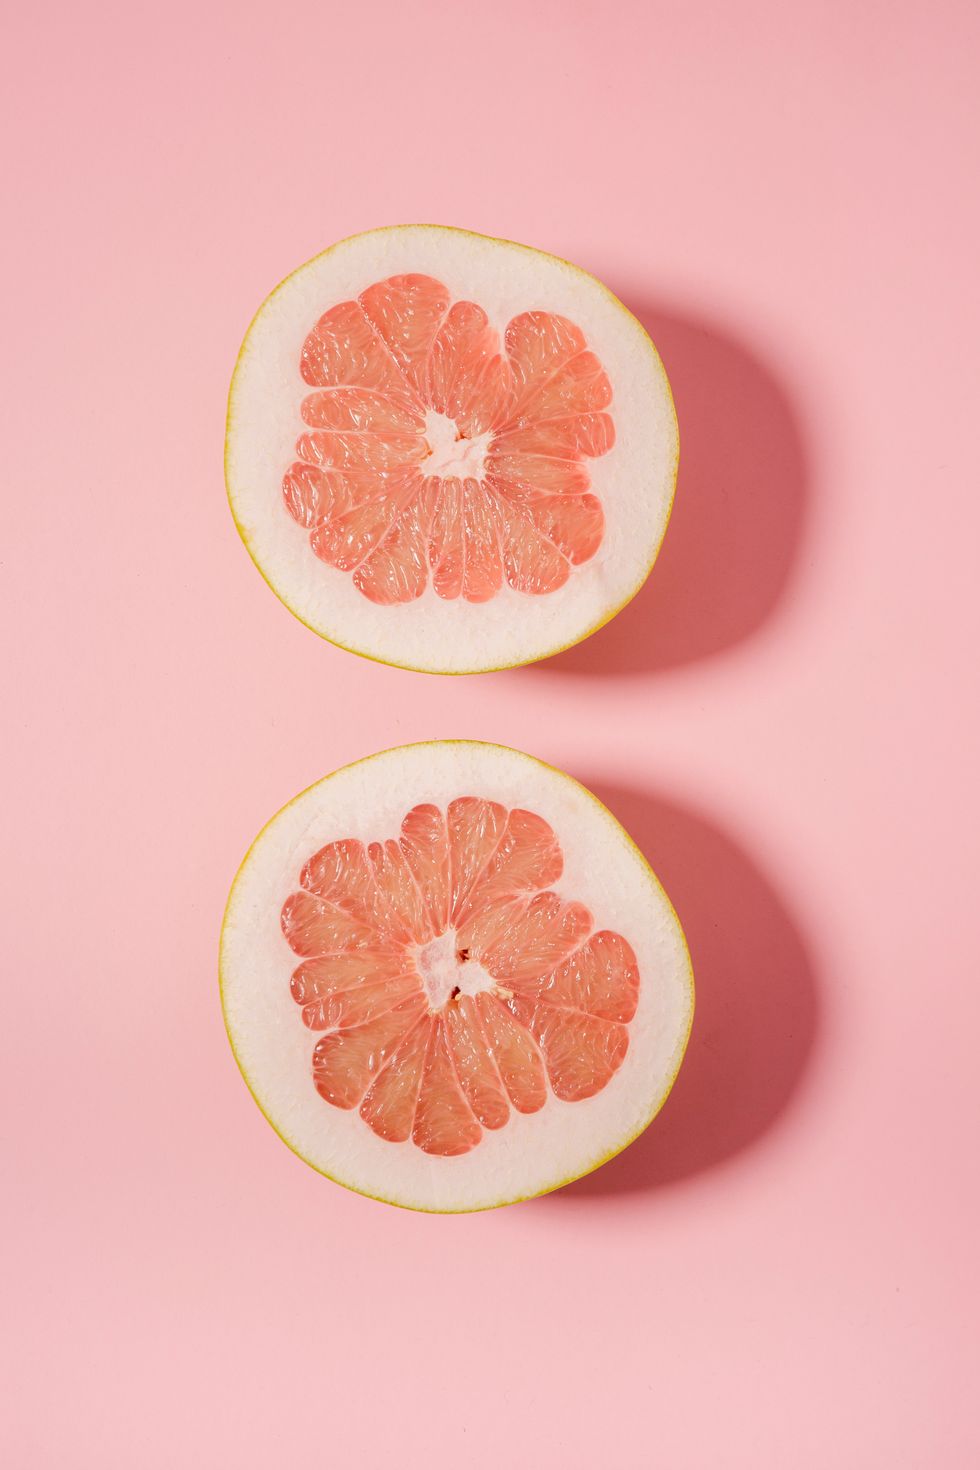 two Grapefruit slices against a pink background